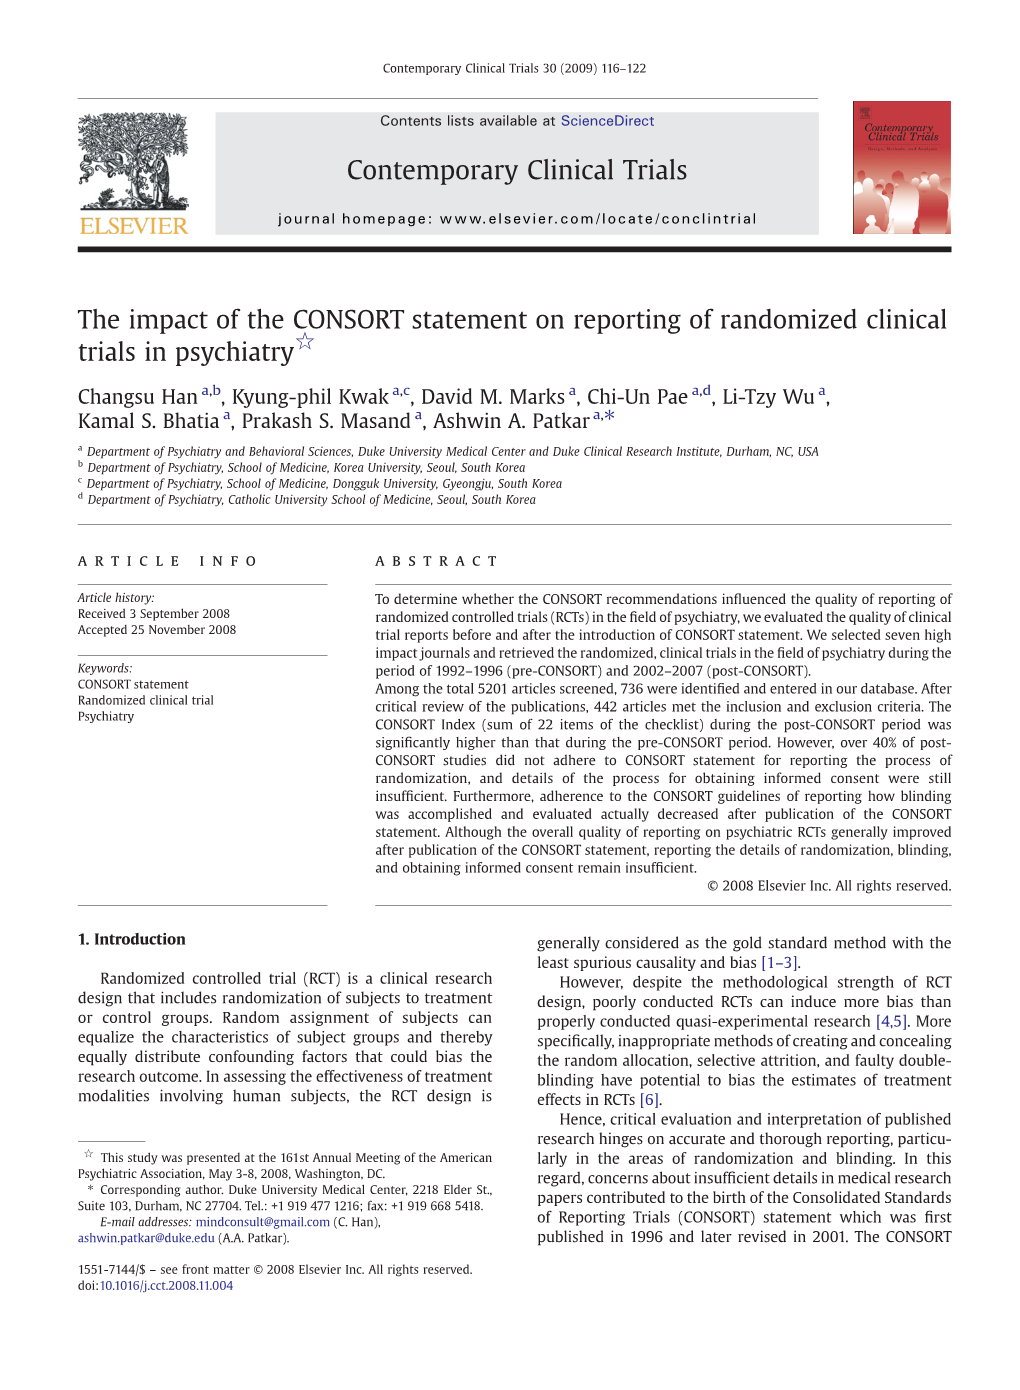 The Impact of the CONSORT Statement on Reporting of Randomized Clinical Trials in Psychiatry☆